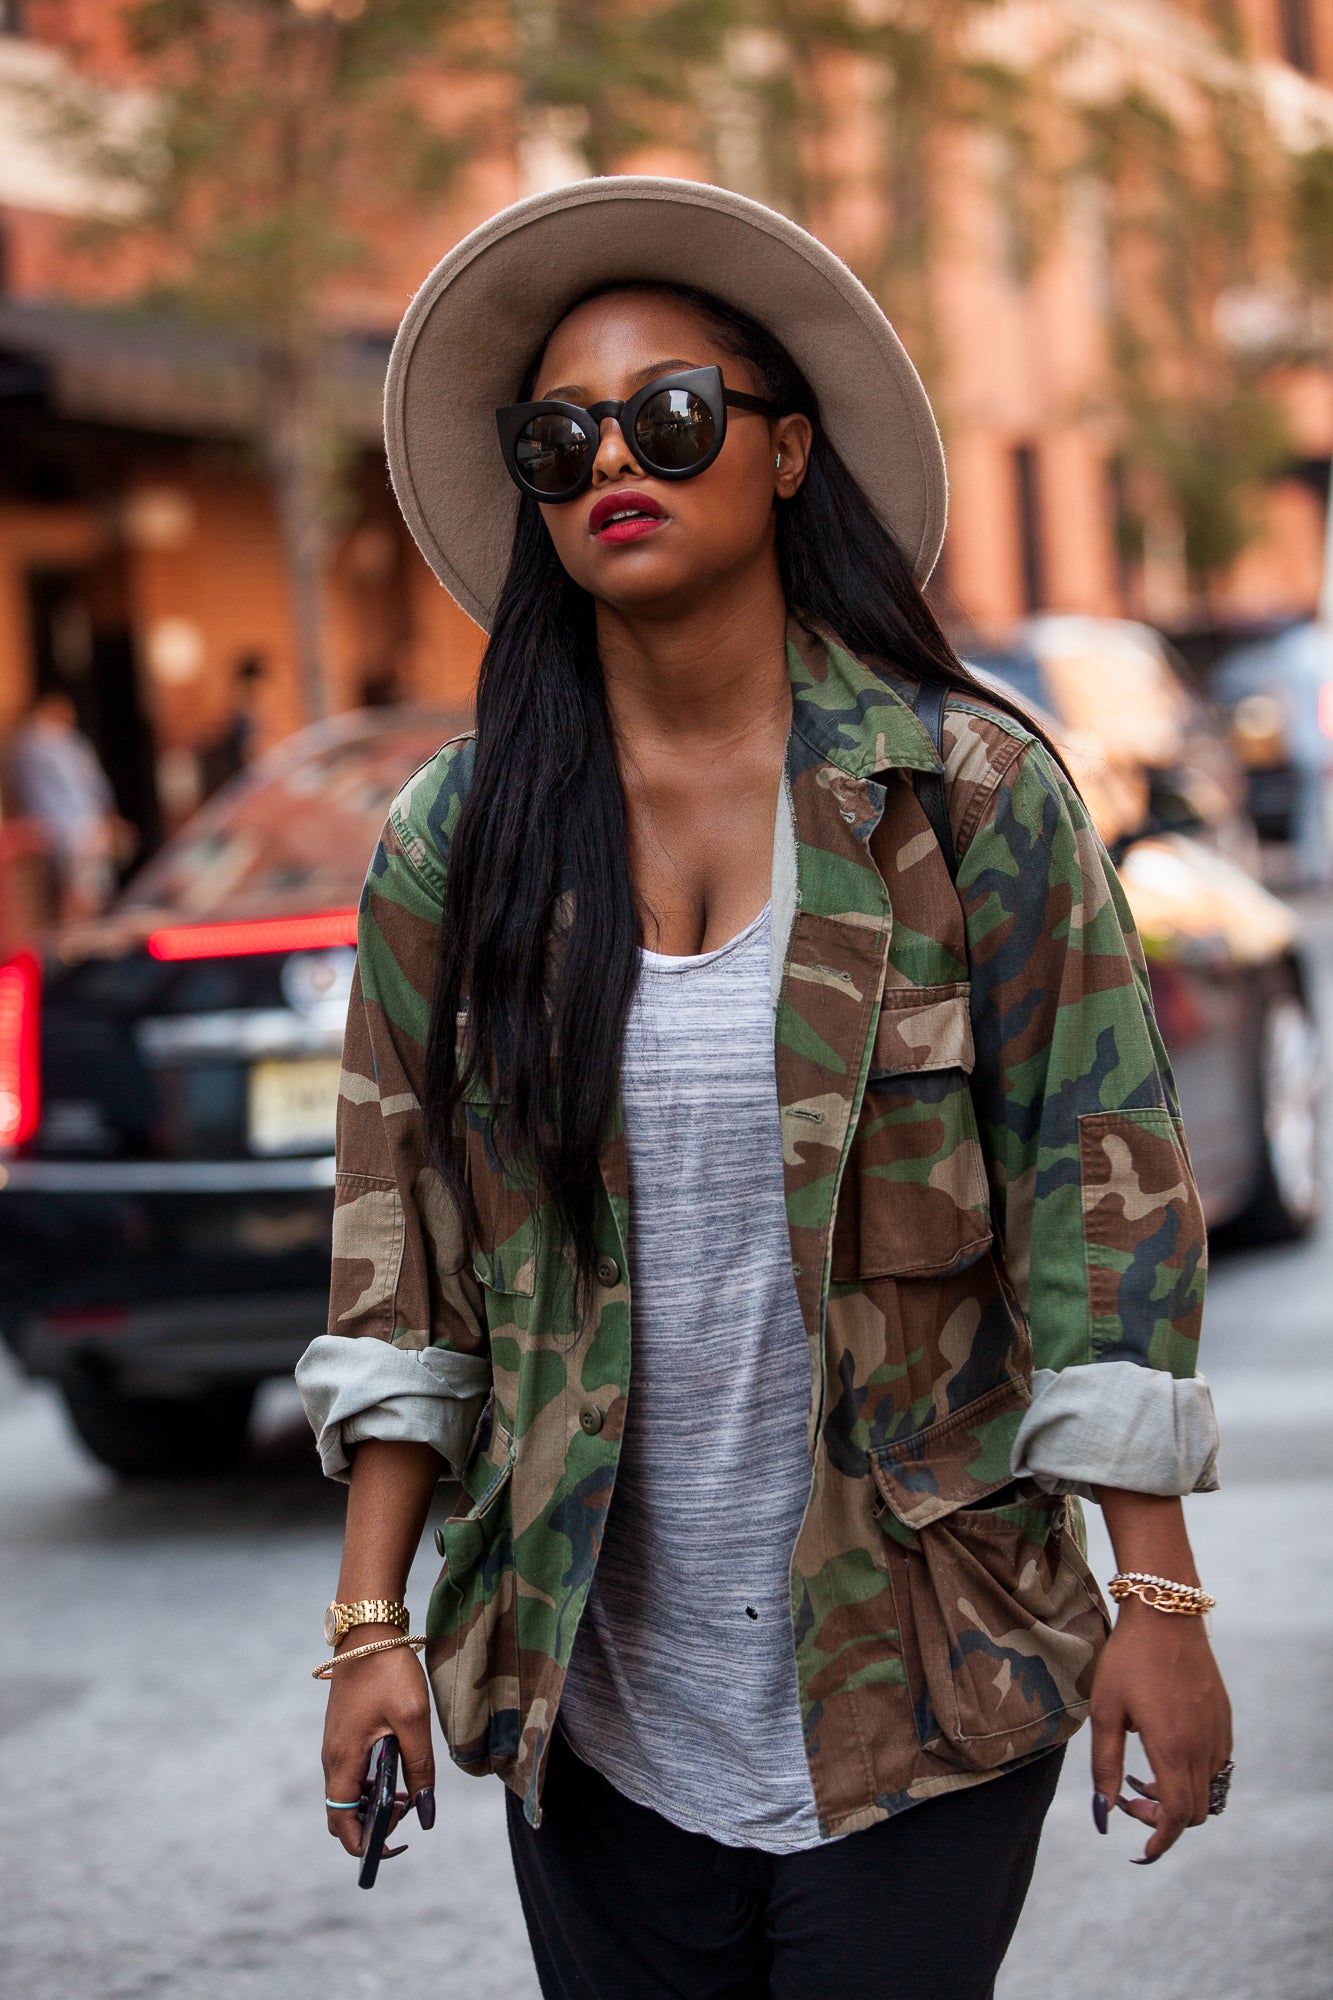 Accessories Street Style: 9 Fun Ways to Upgrade Your Hat Game This Season